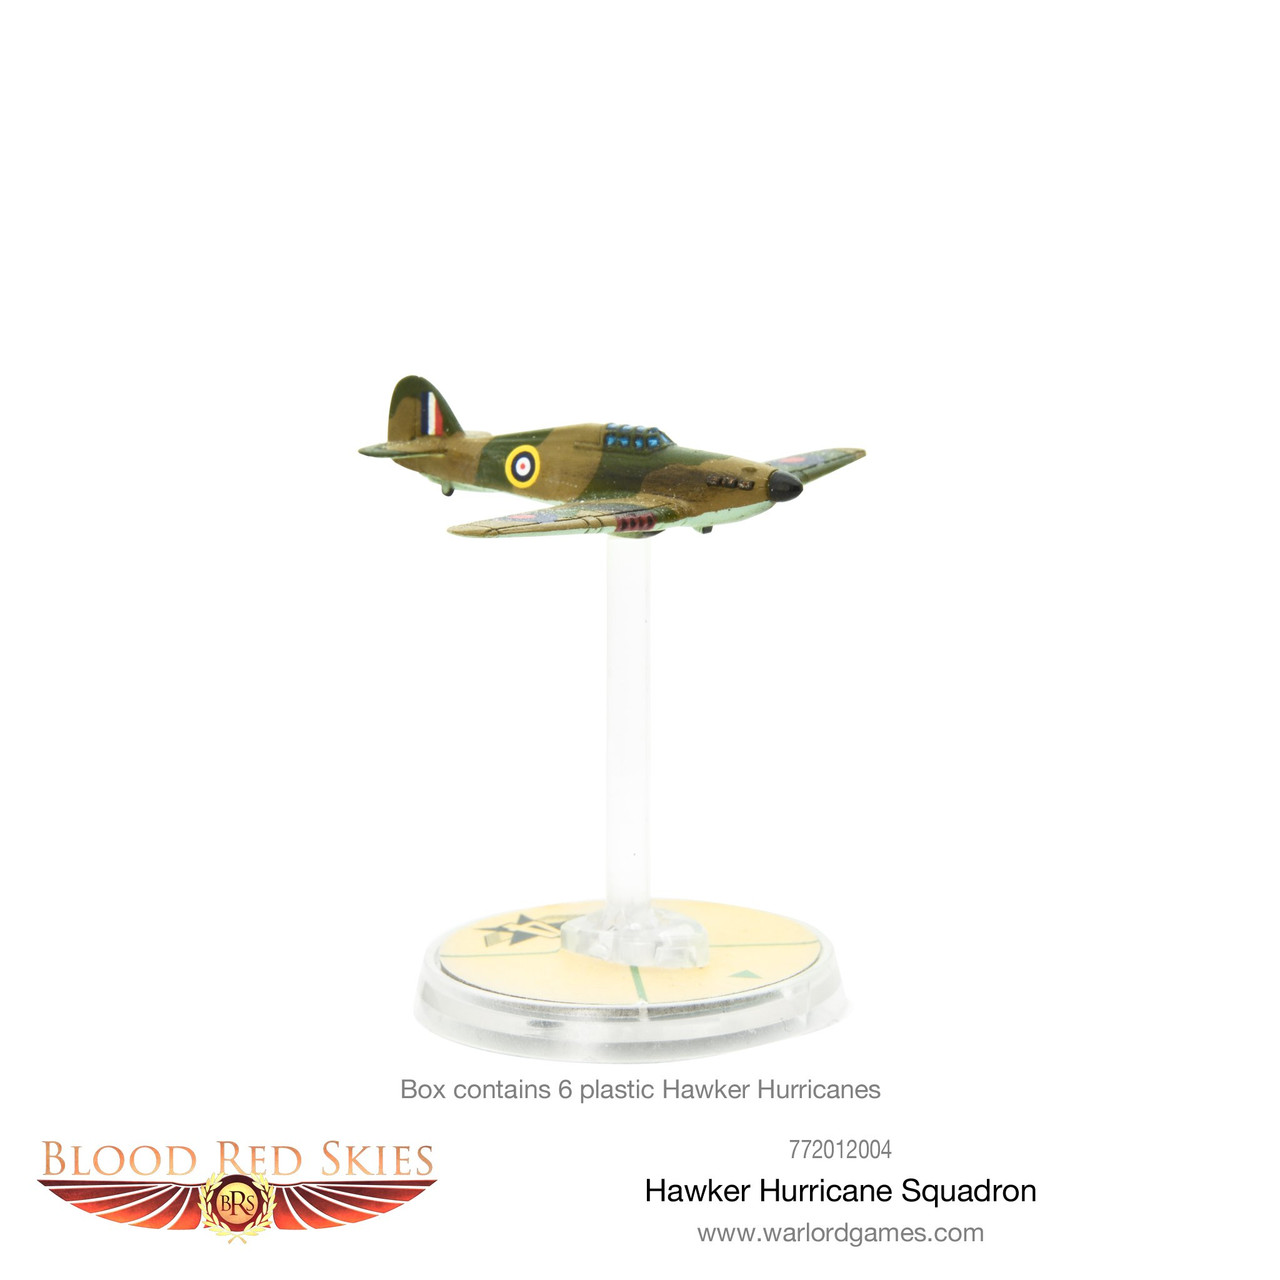 Blood Red Skies - Hawker Hurricane Squadron - 772012004